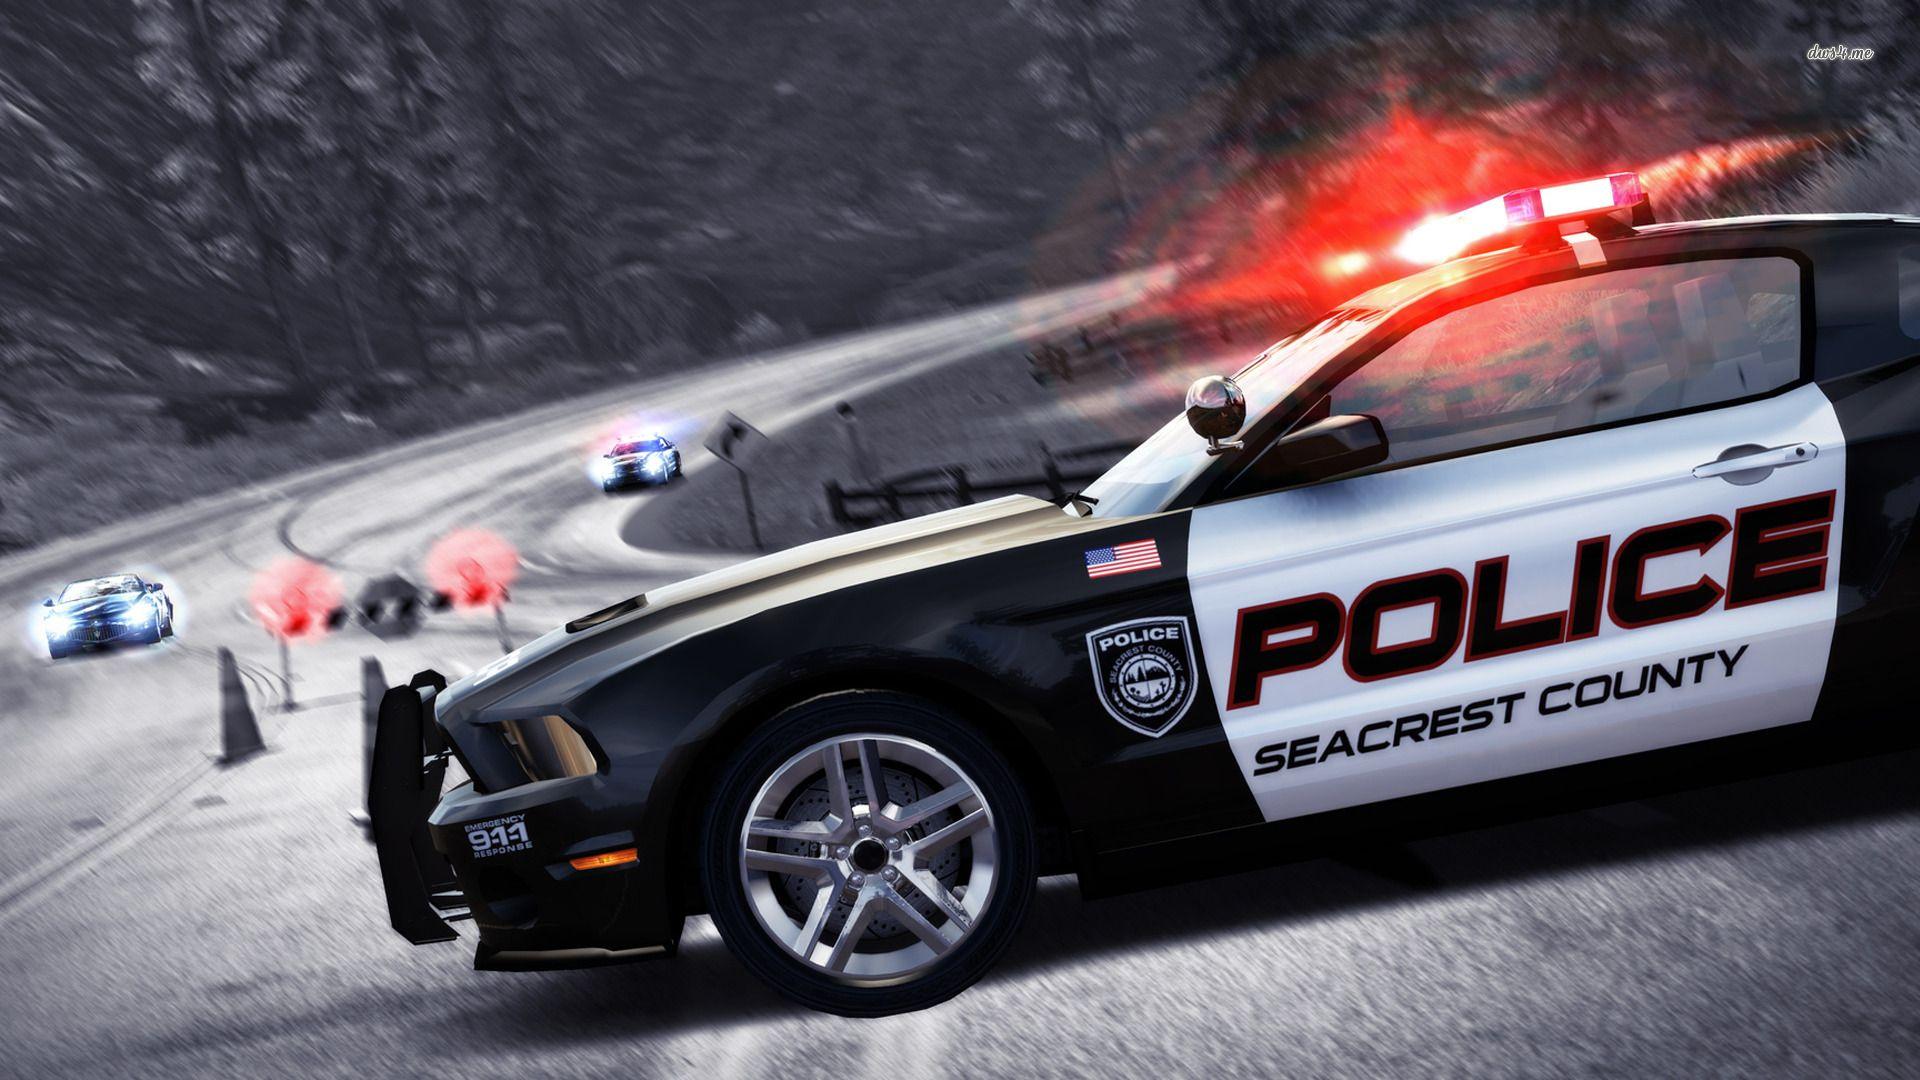 Need for Speed Pursuit police car wallpaper